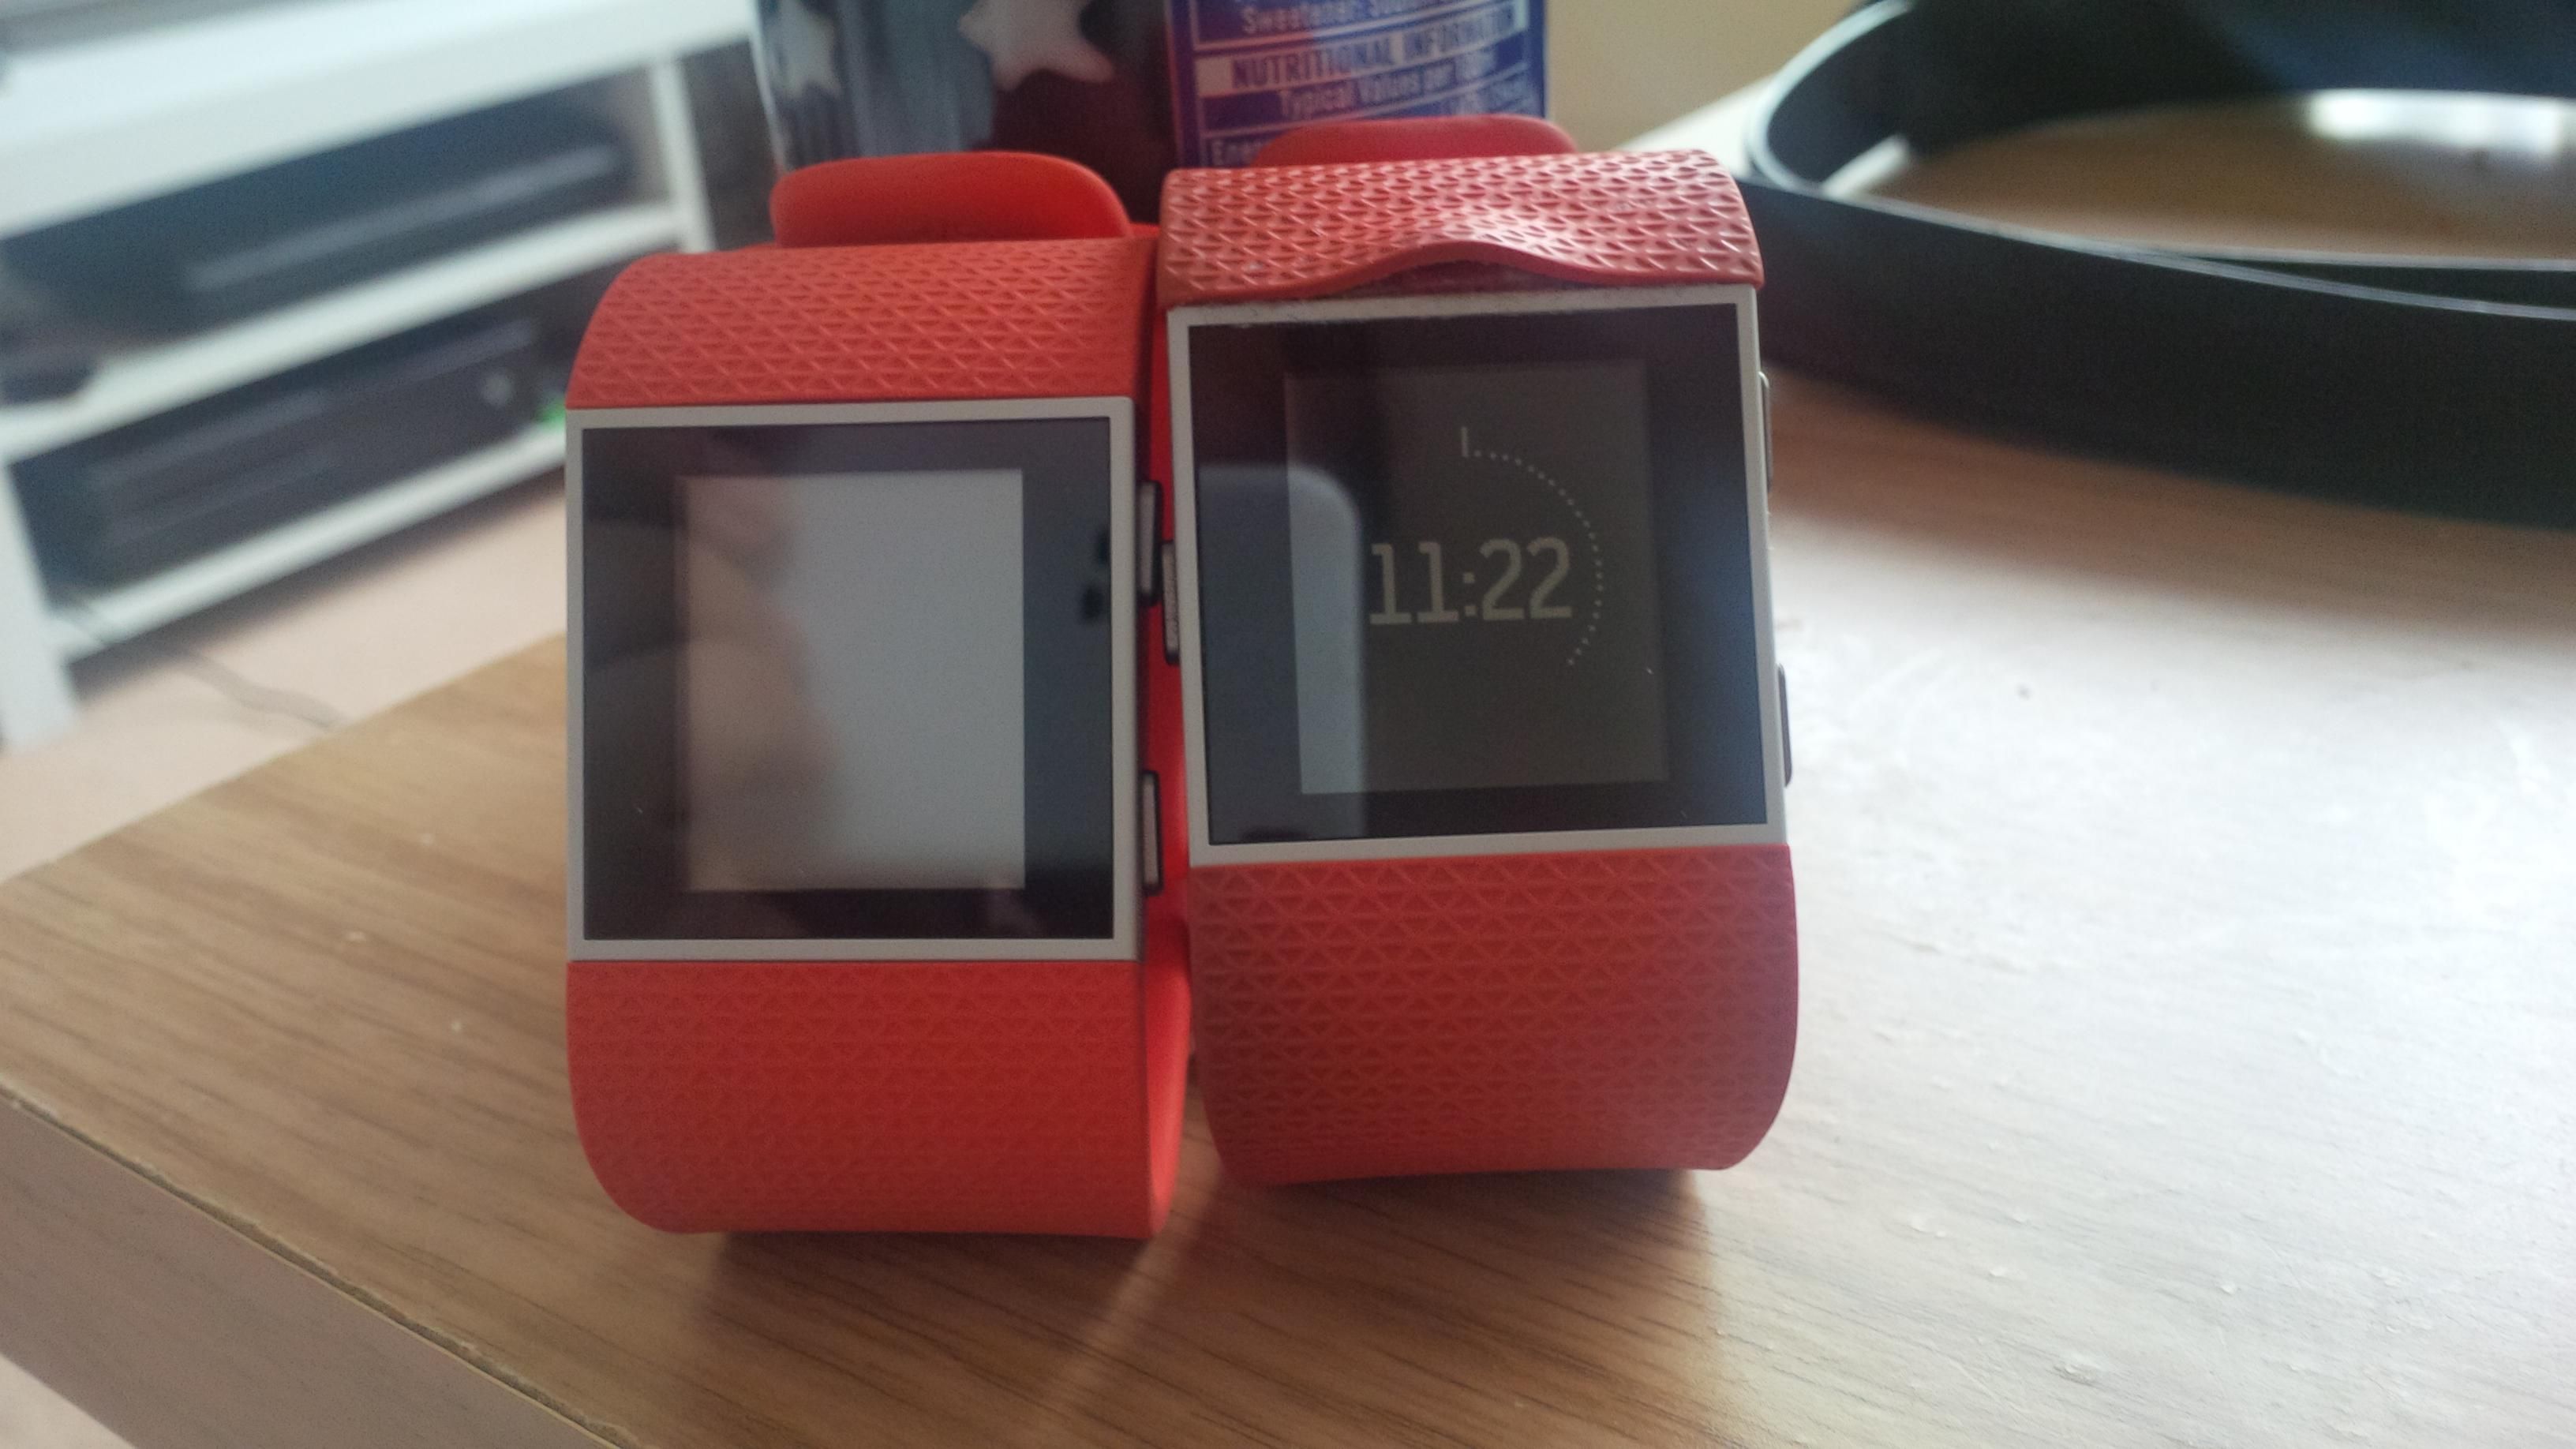 Fitbit Surge strap coming loose 